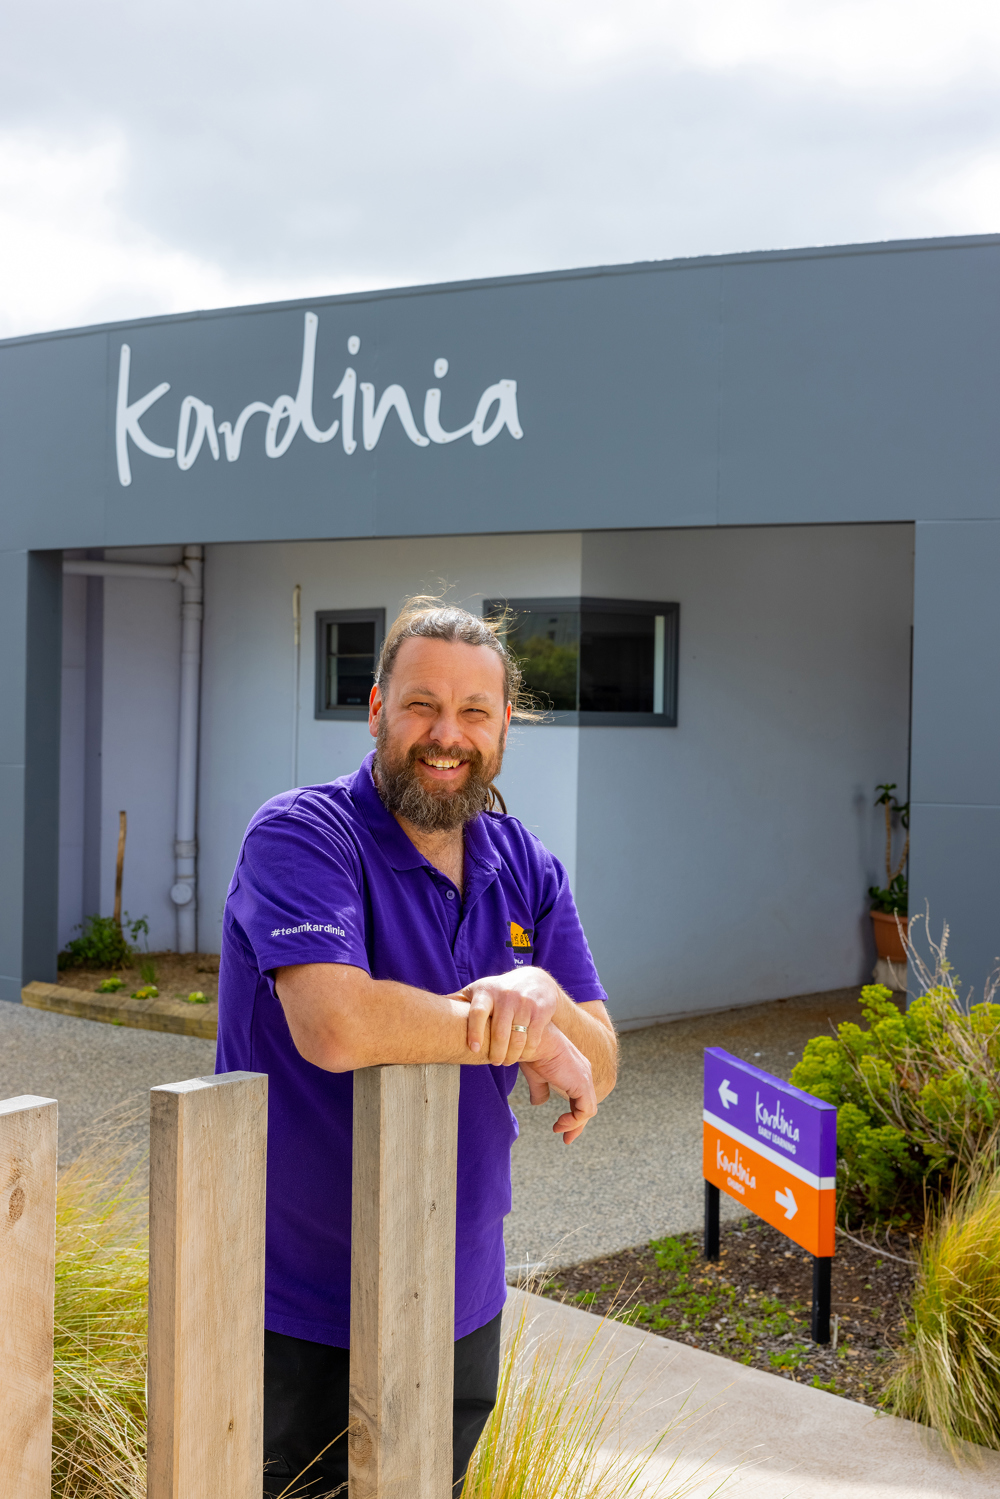 Ludwig working at Kardinia Early Childhood education centre